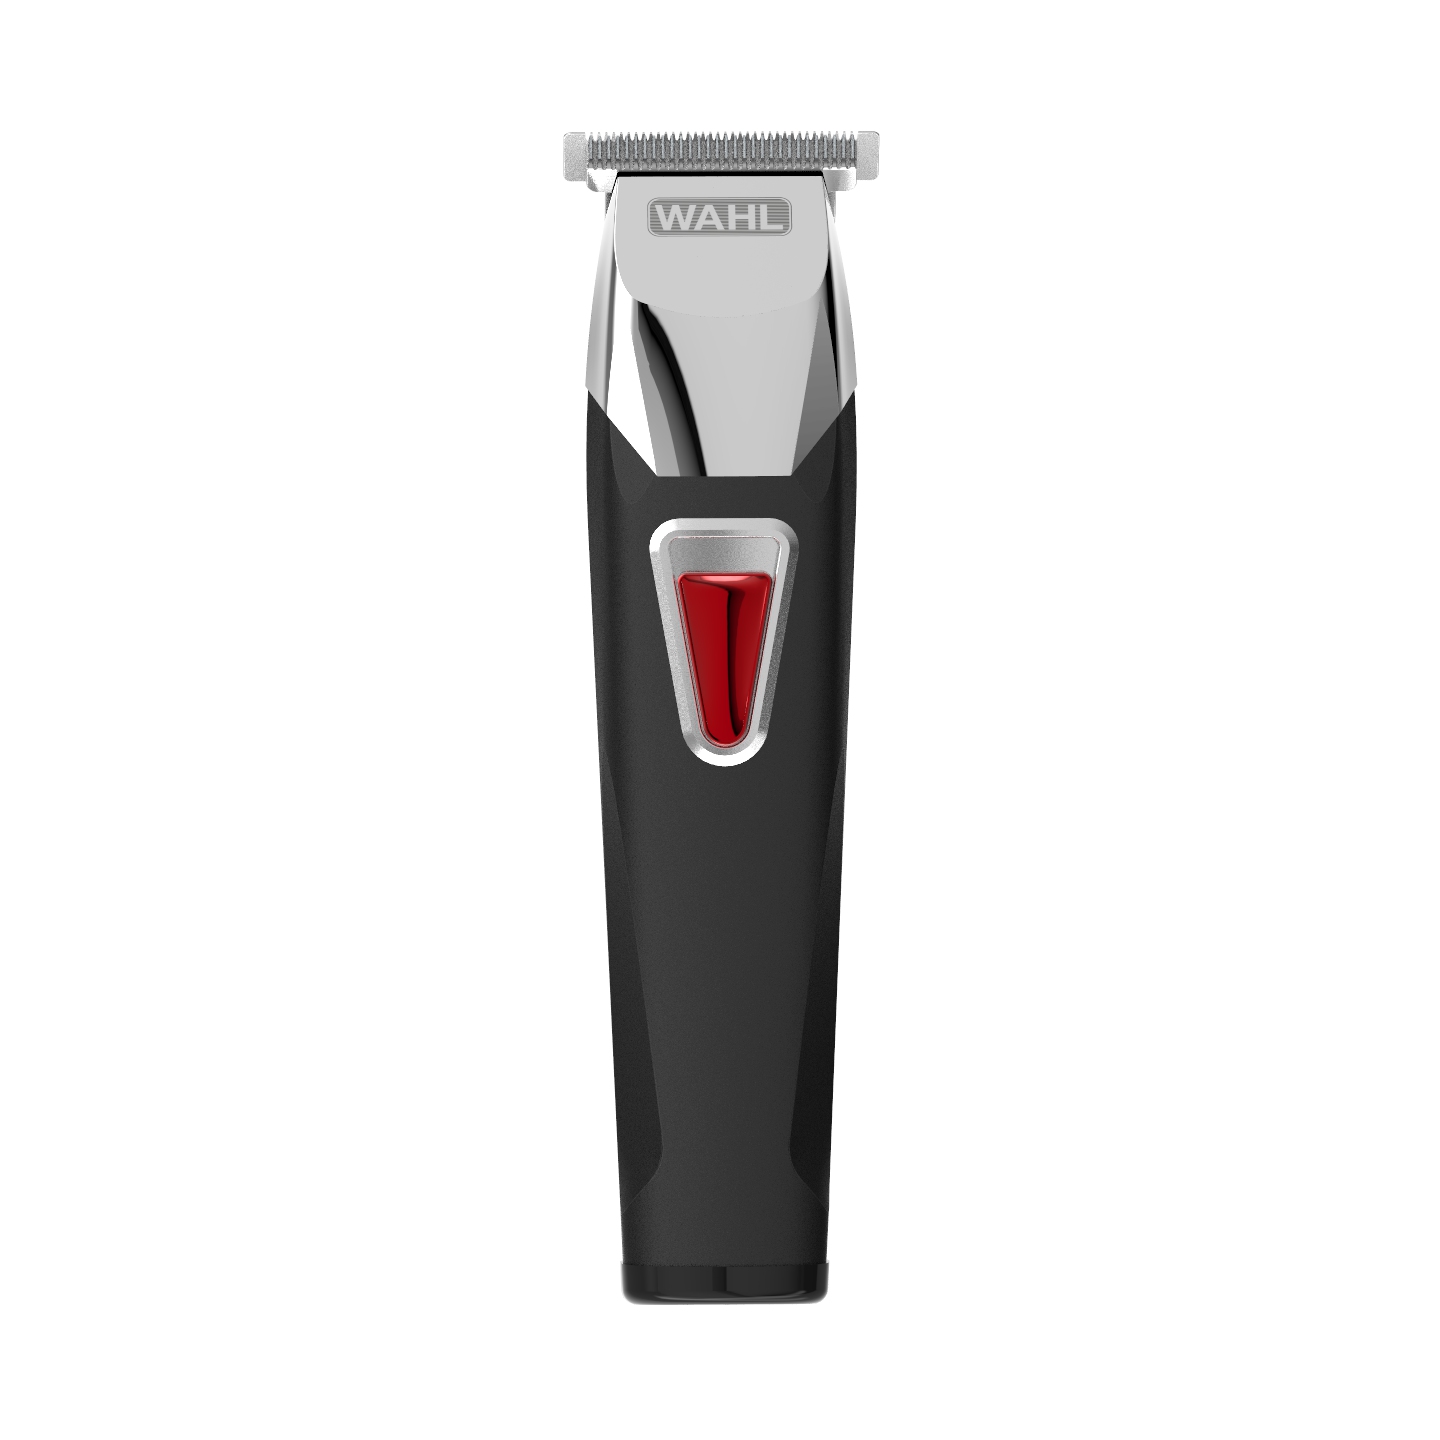 wahl cordless t blade trimmer